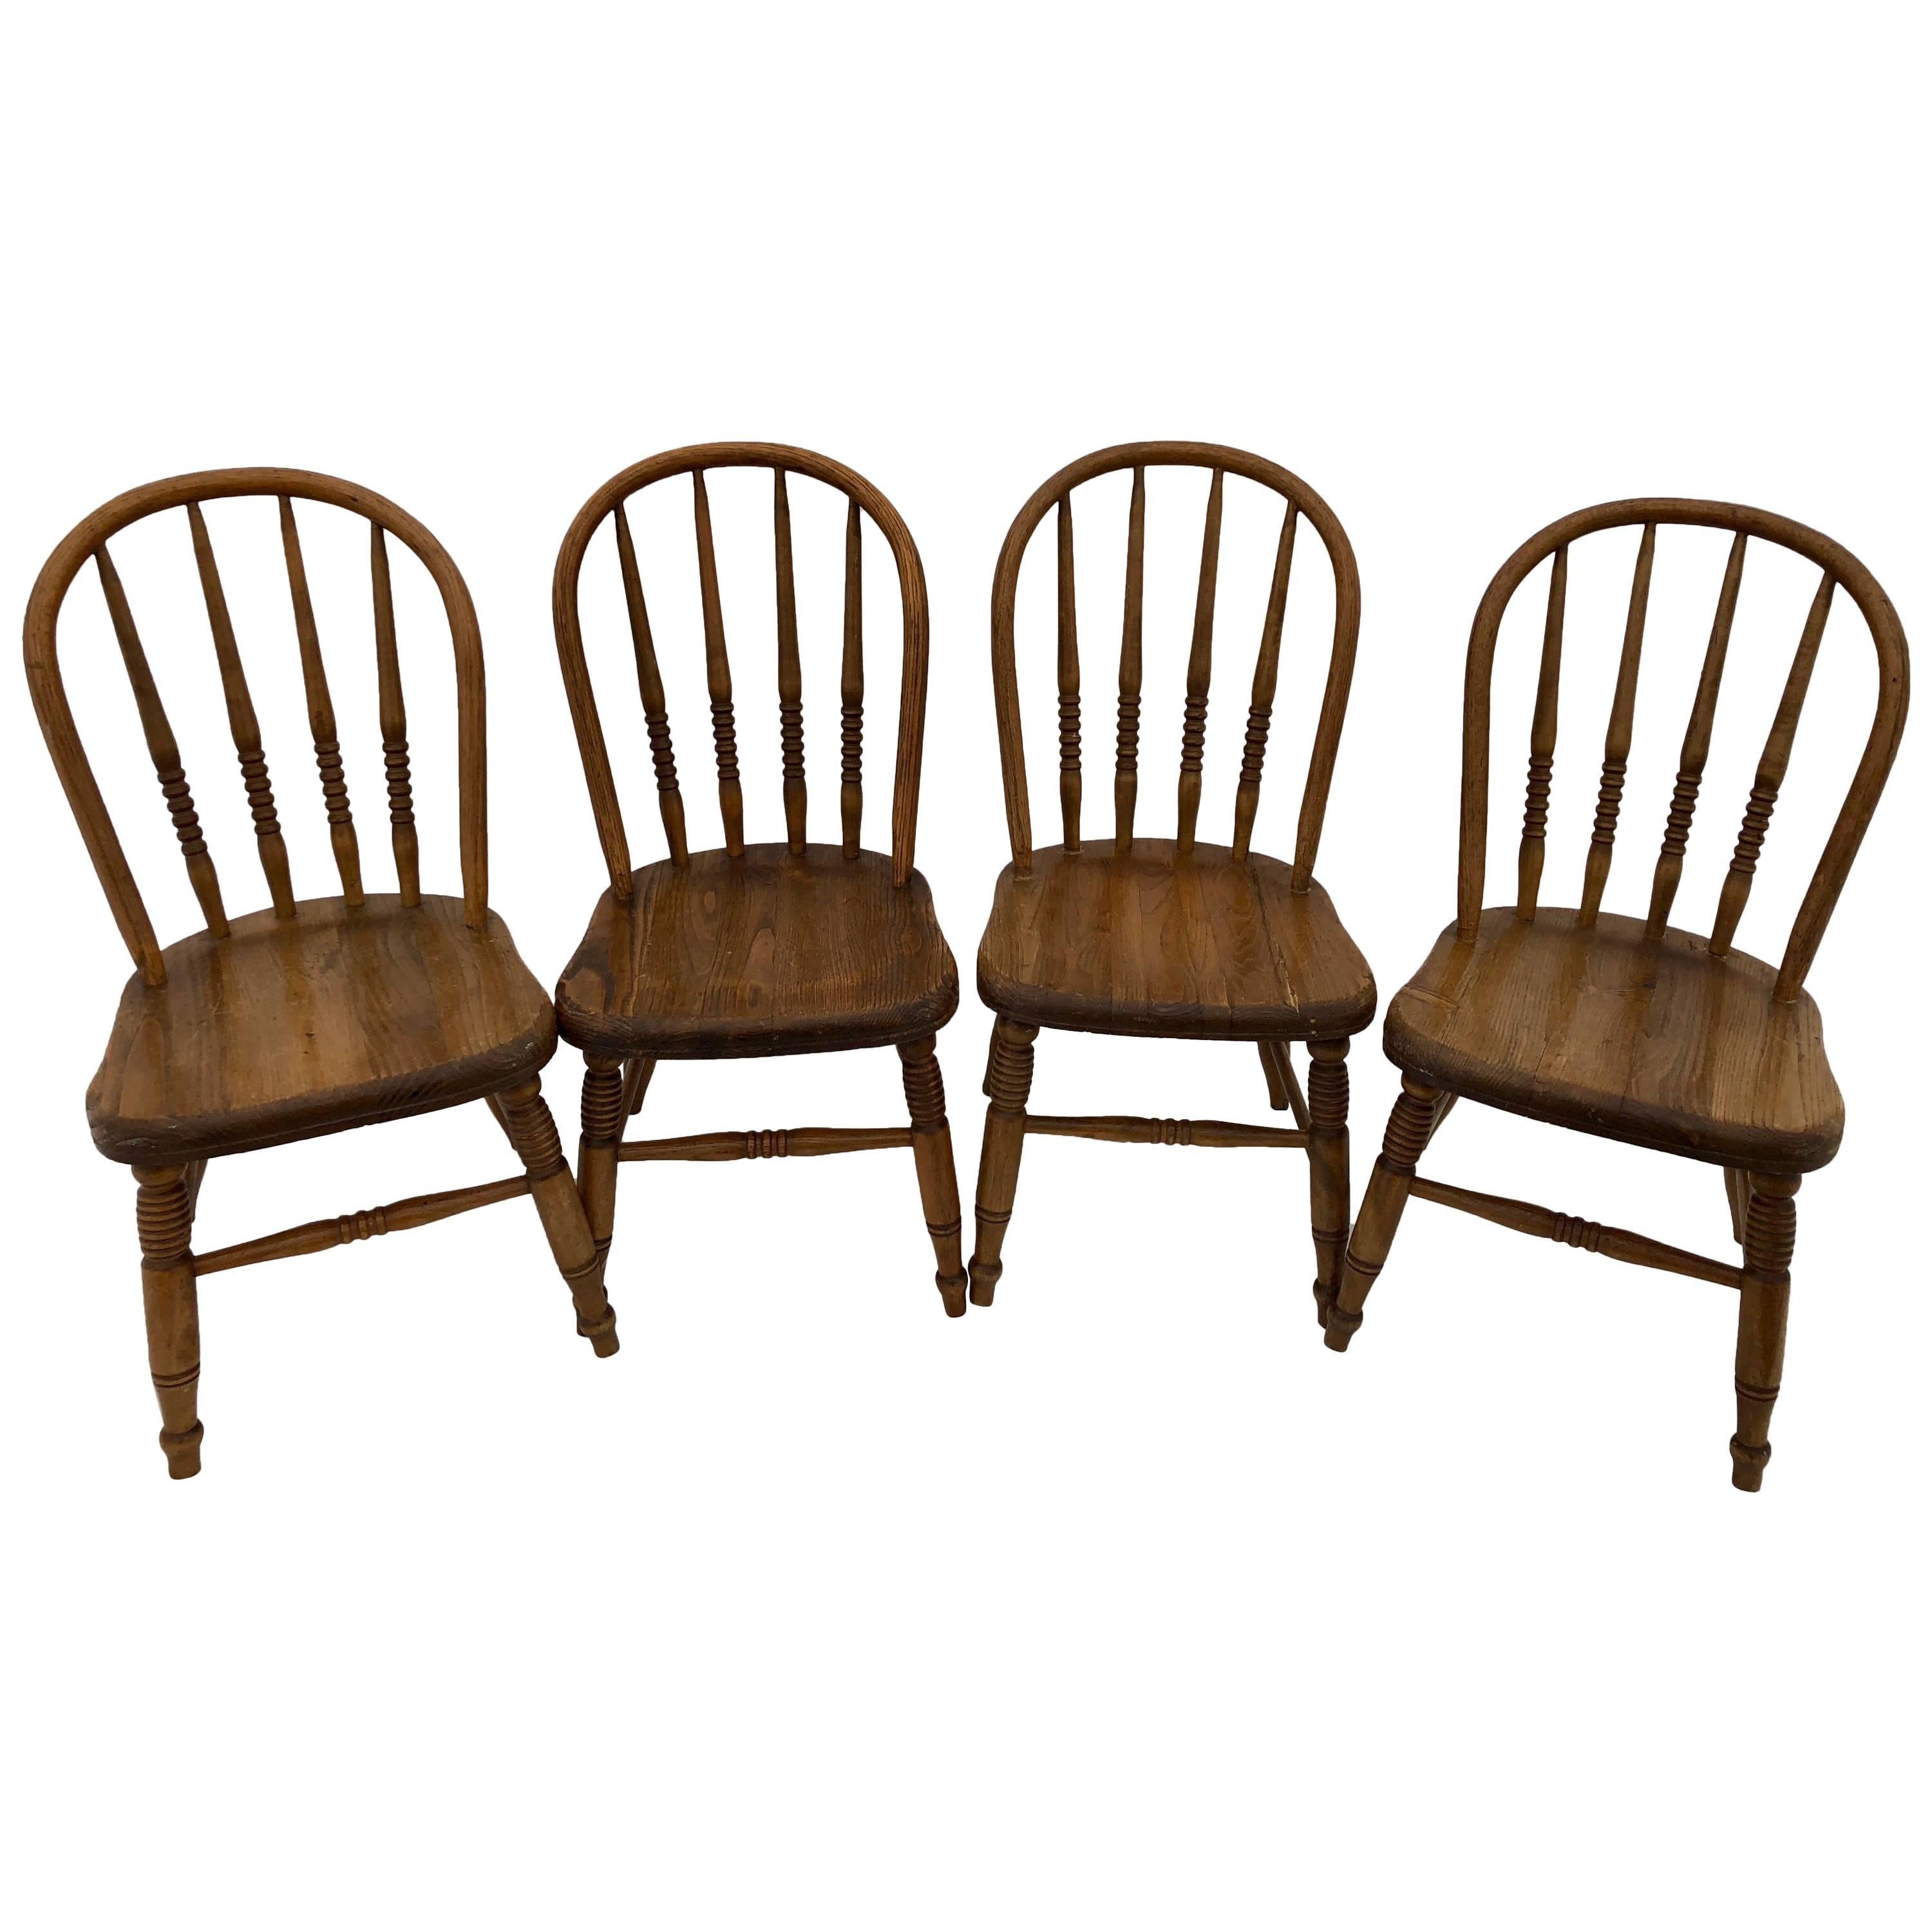 Set of Four Wooden Children's Chairs with Spindle and Rounded Backs, 1900s For Sale